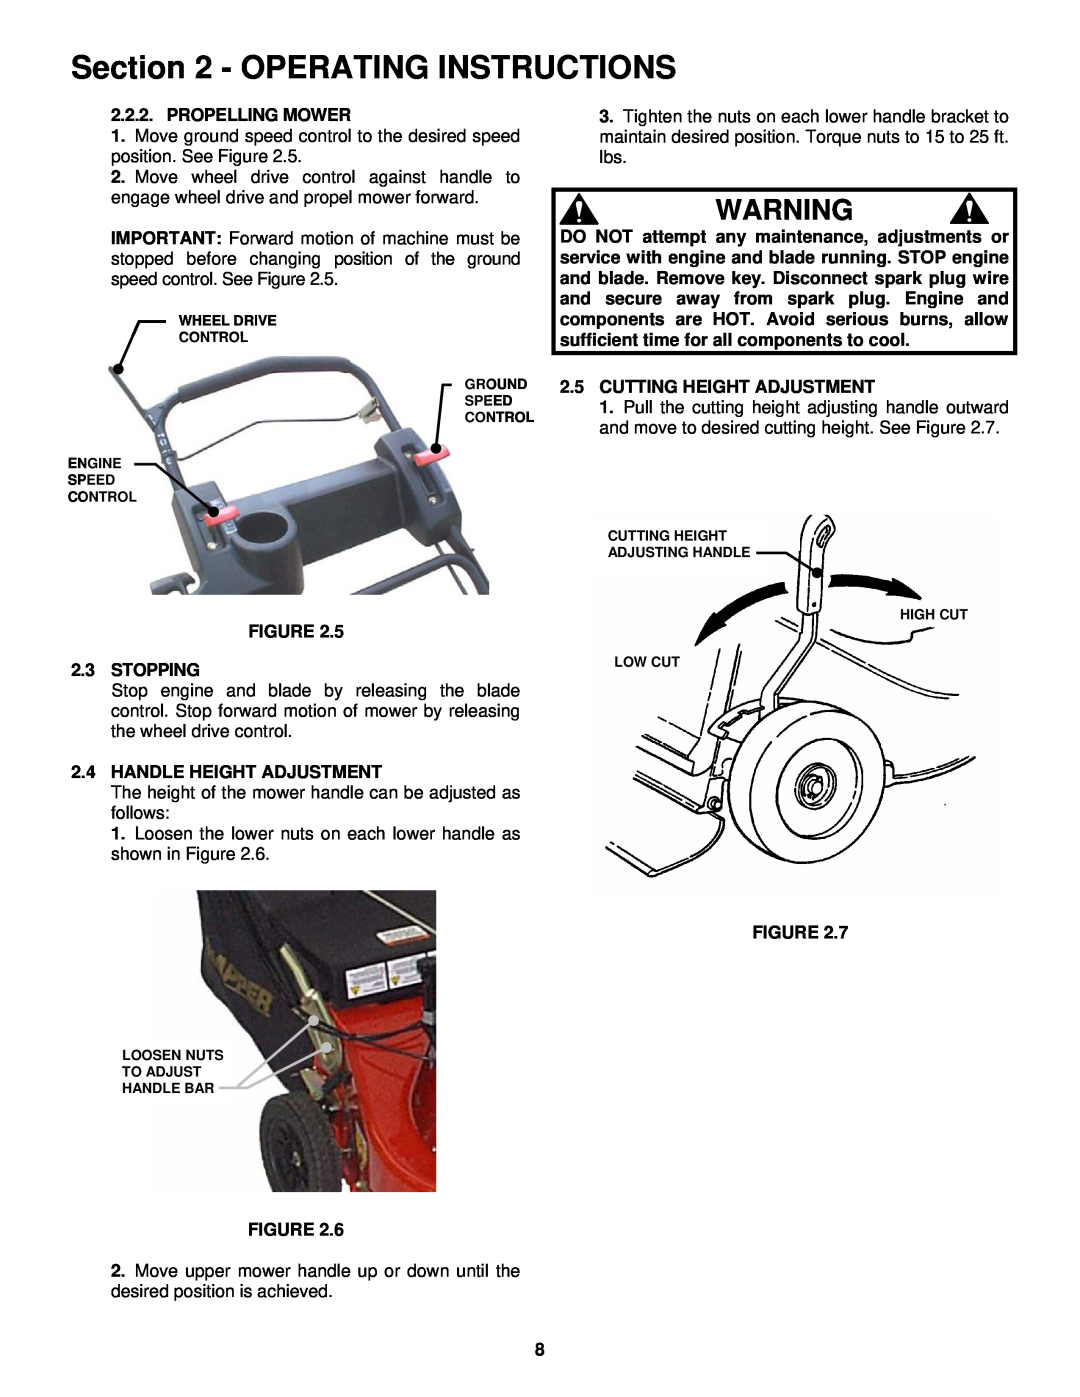 Snapper ECLP21602KWV Operating Instructions, Propelling Mower, Stopping, Handle Height Adjustment 